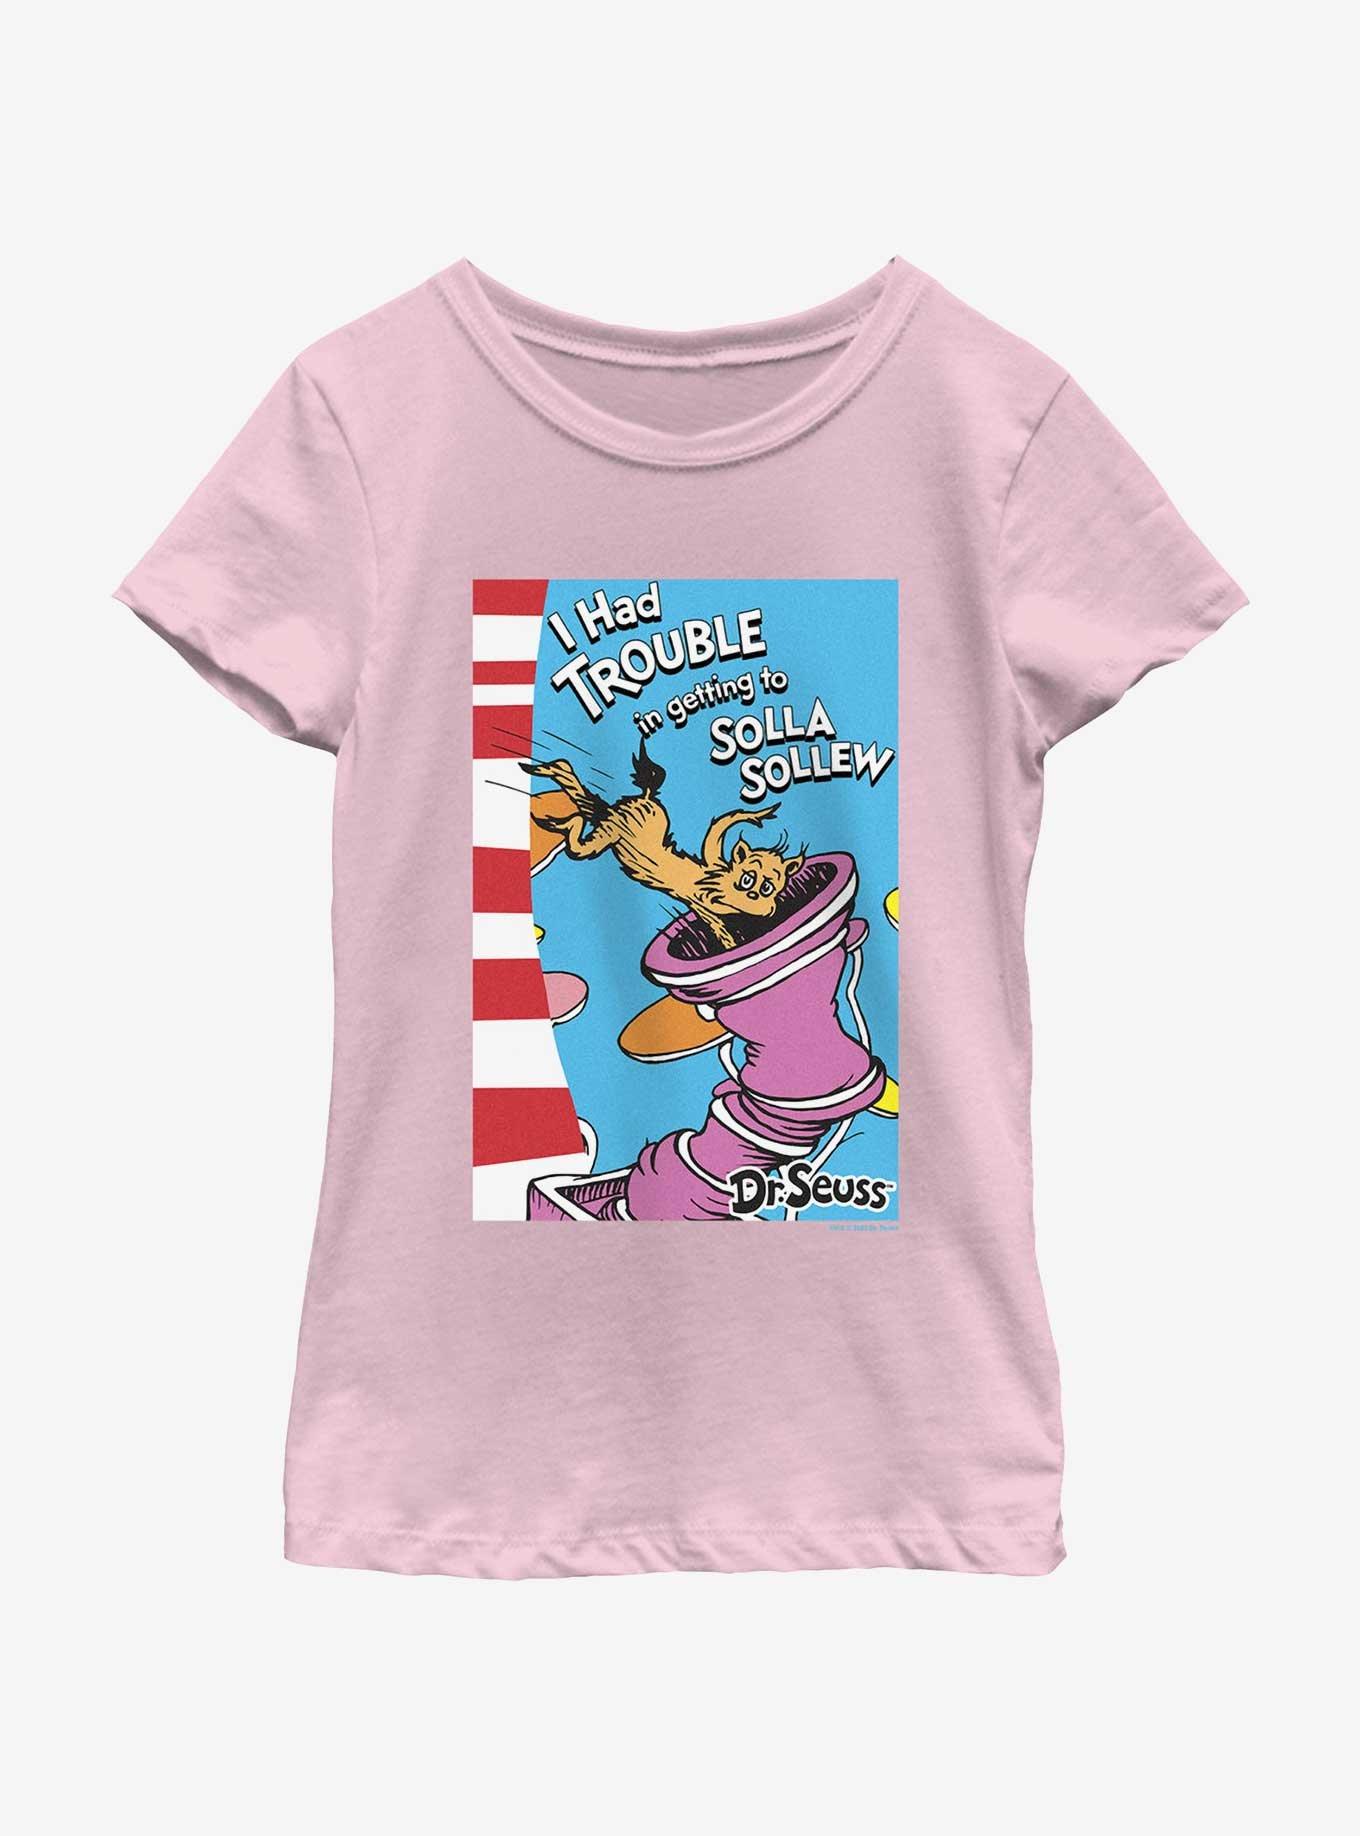 Dr. Seuss's I Had Trouble Getting Into Solla Sollew Cover Youth Girls T-Shirt, PINK, hi-res